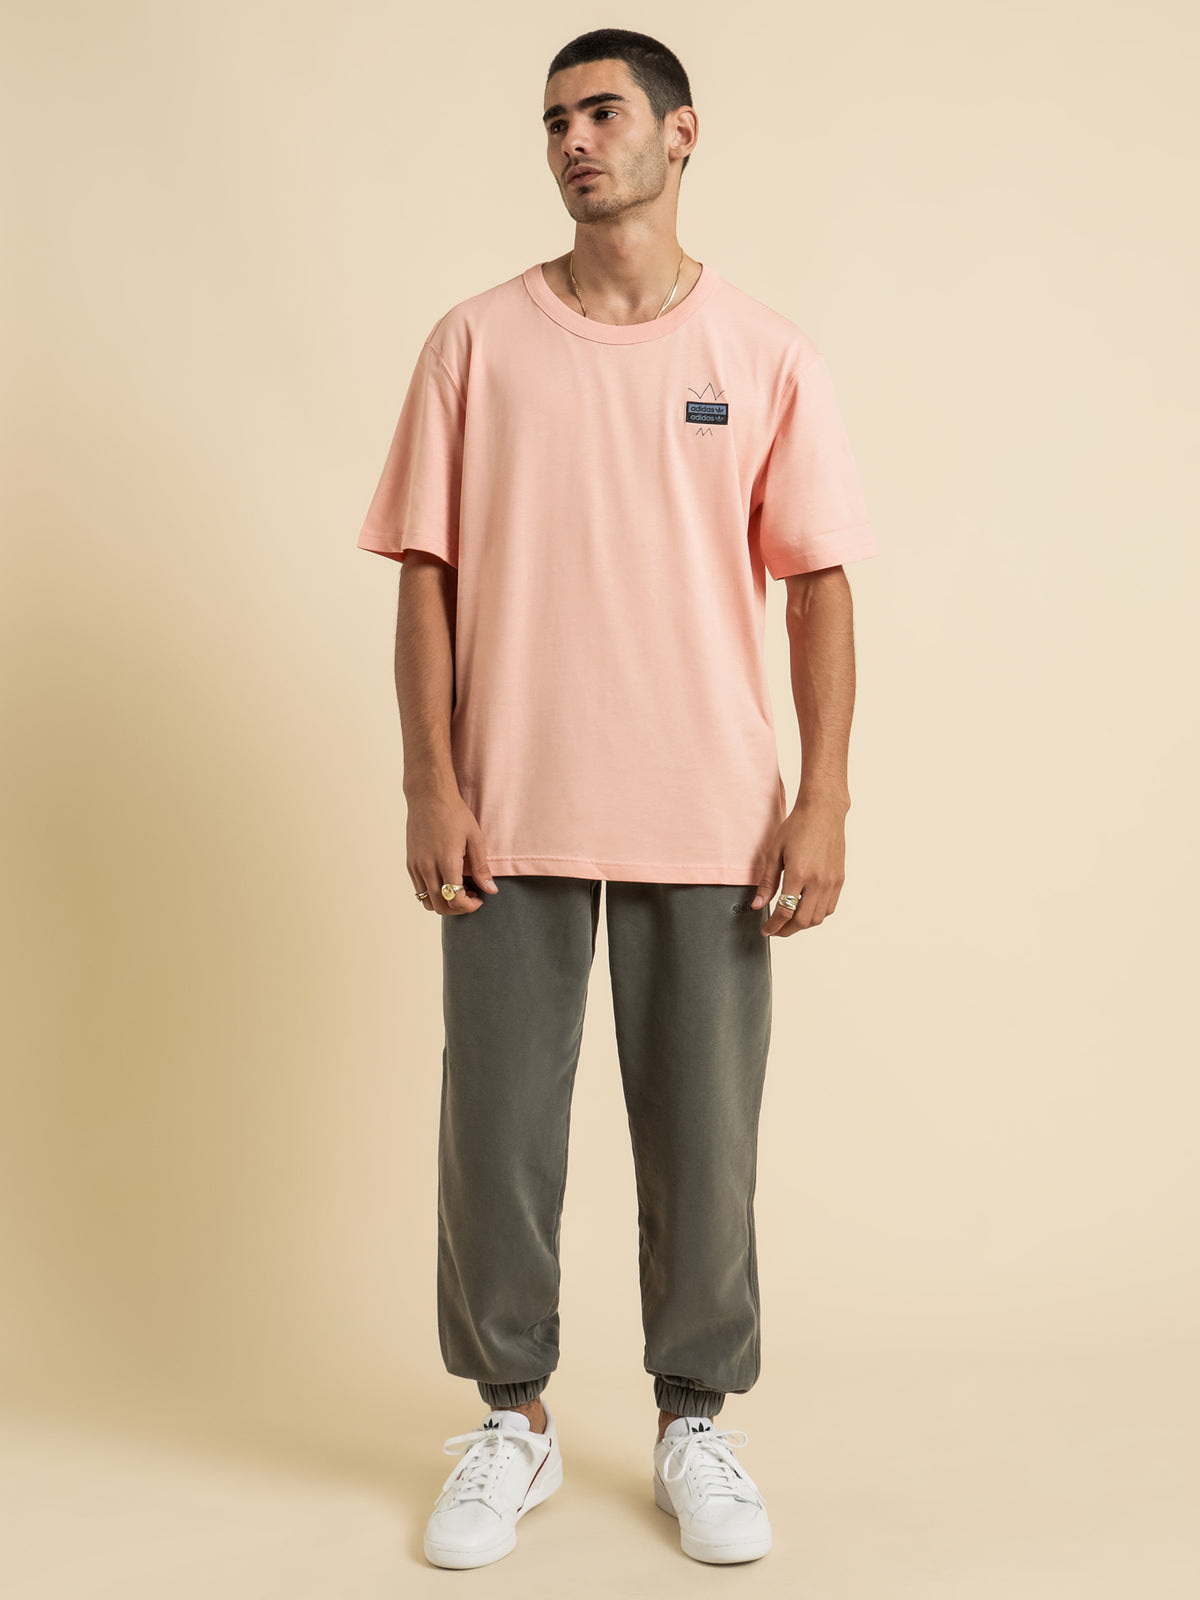 Overdyed Trackpants in Branch